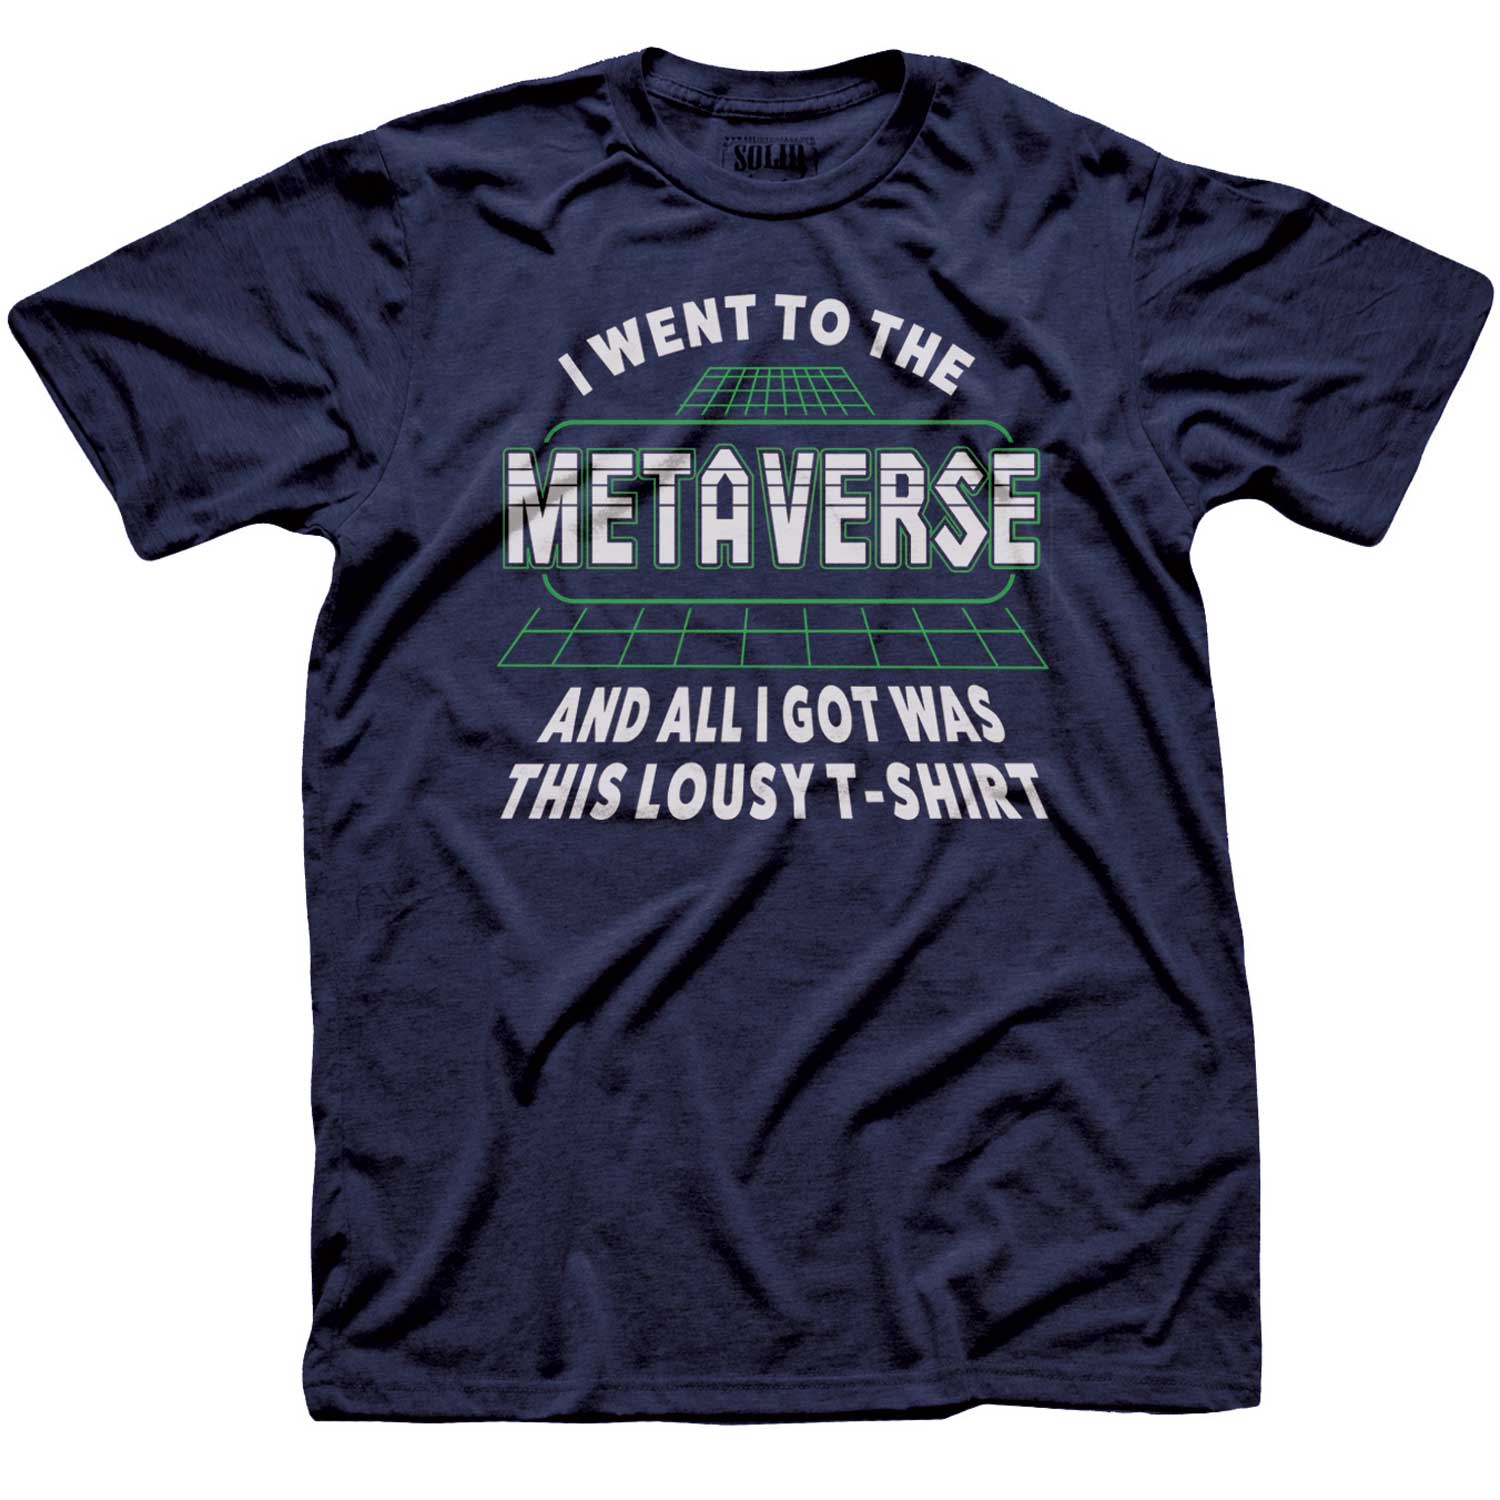 I Went to the Metaverse and I All Got was This Lousy T-shirt